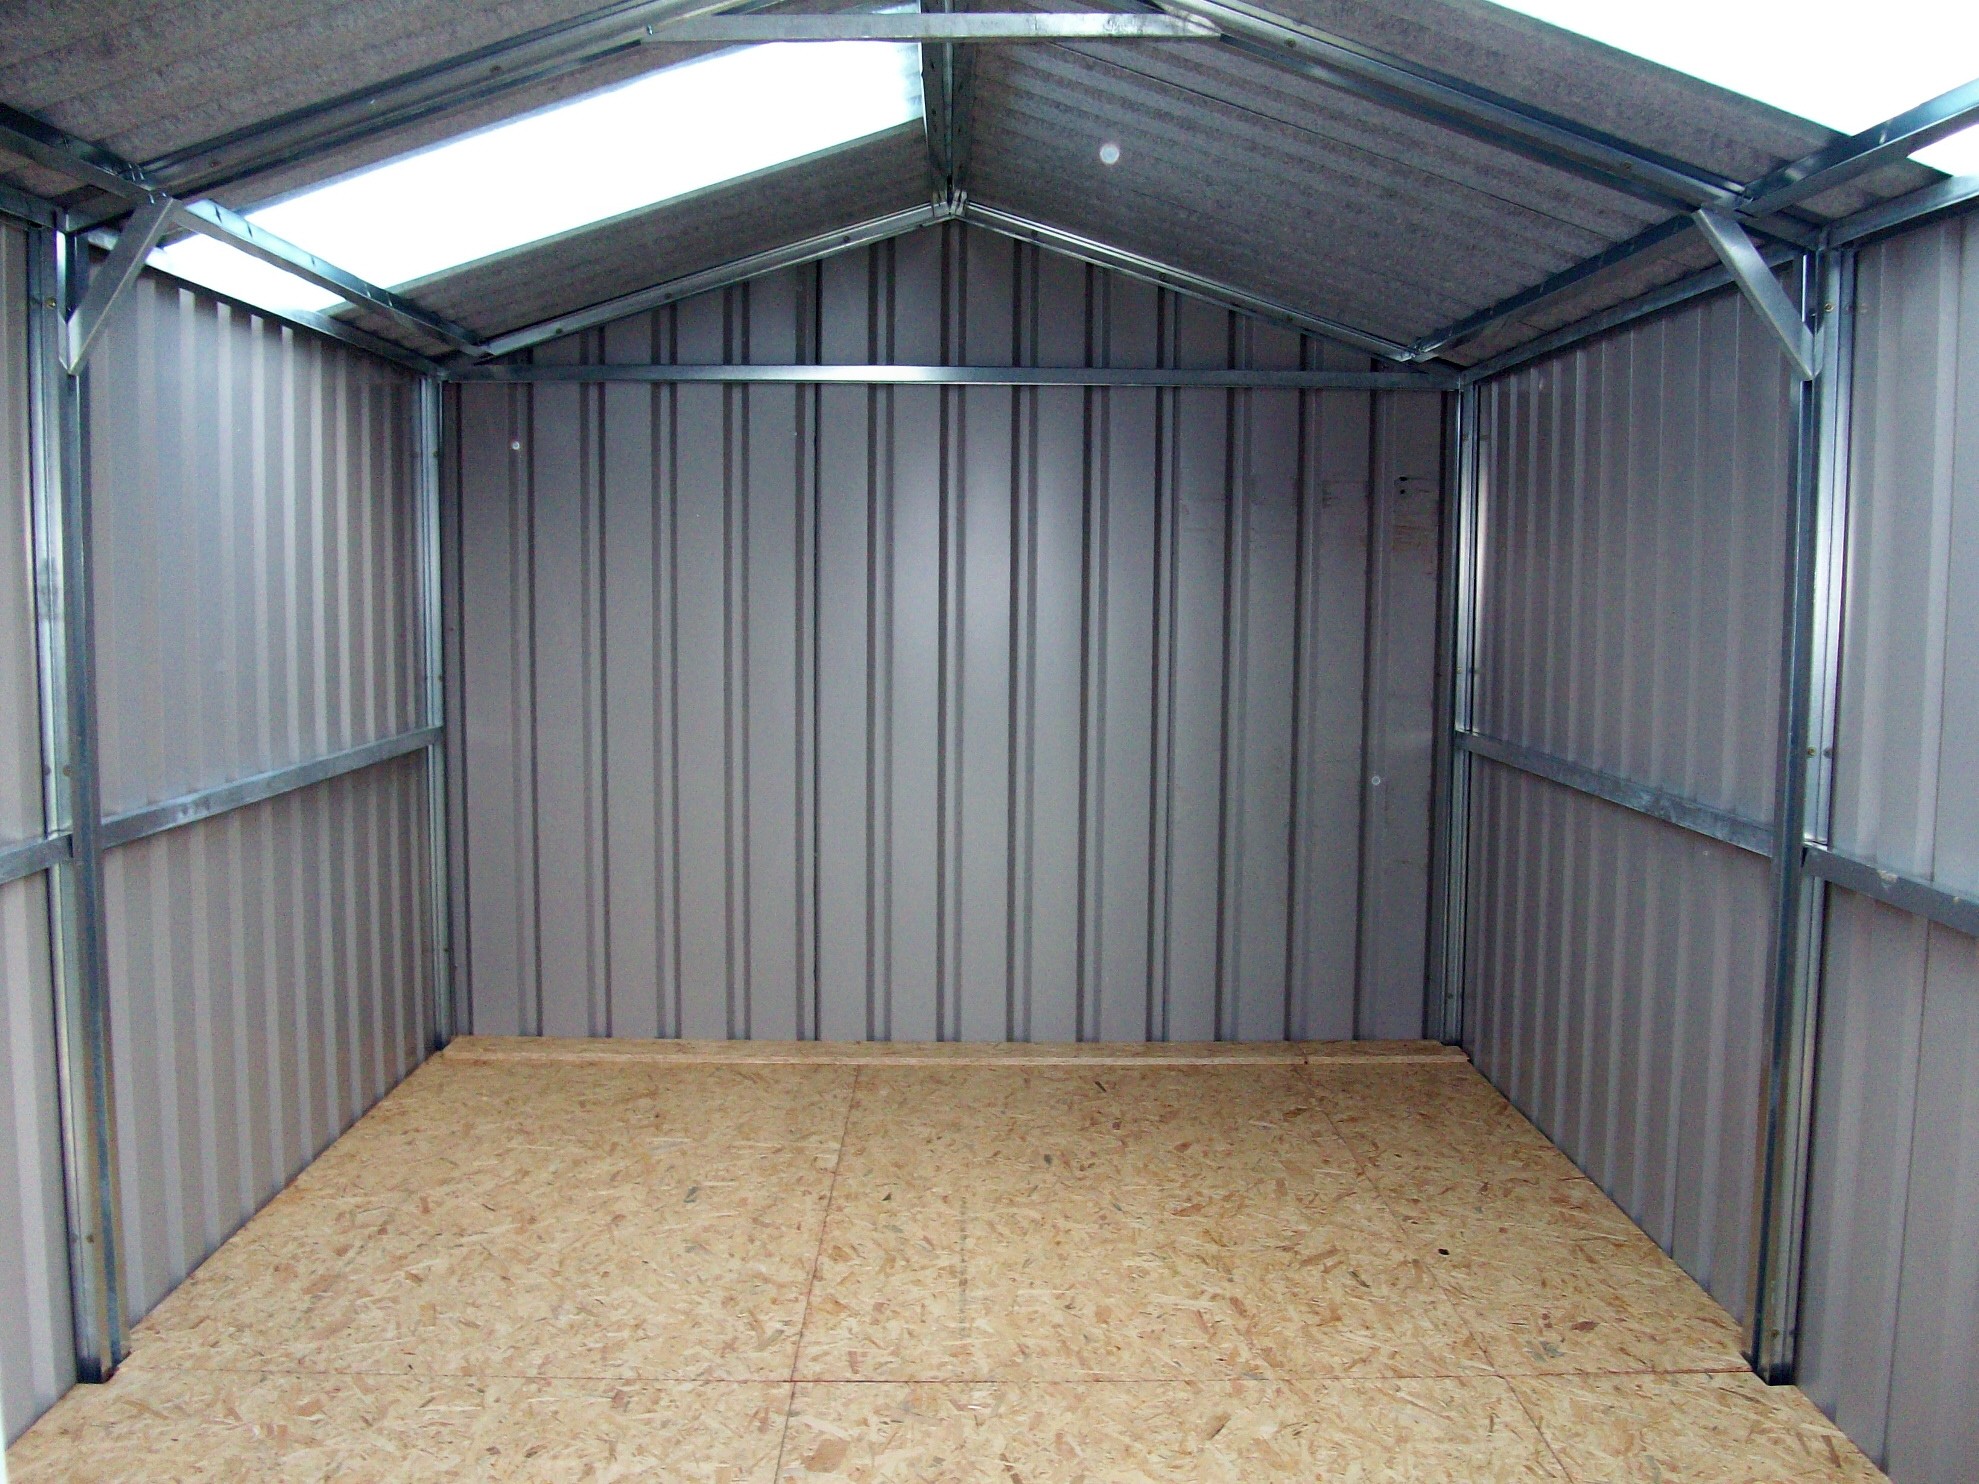 Building a Metal Shed - Is It a Good DYI Project? ShedBuilder.info